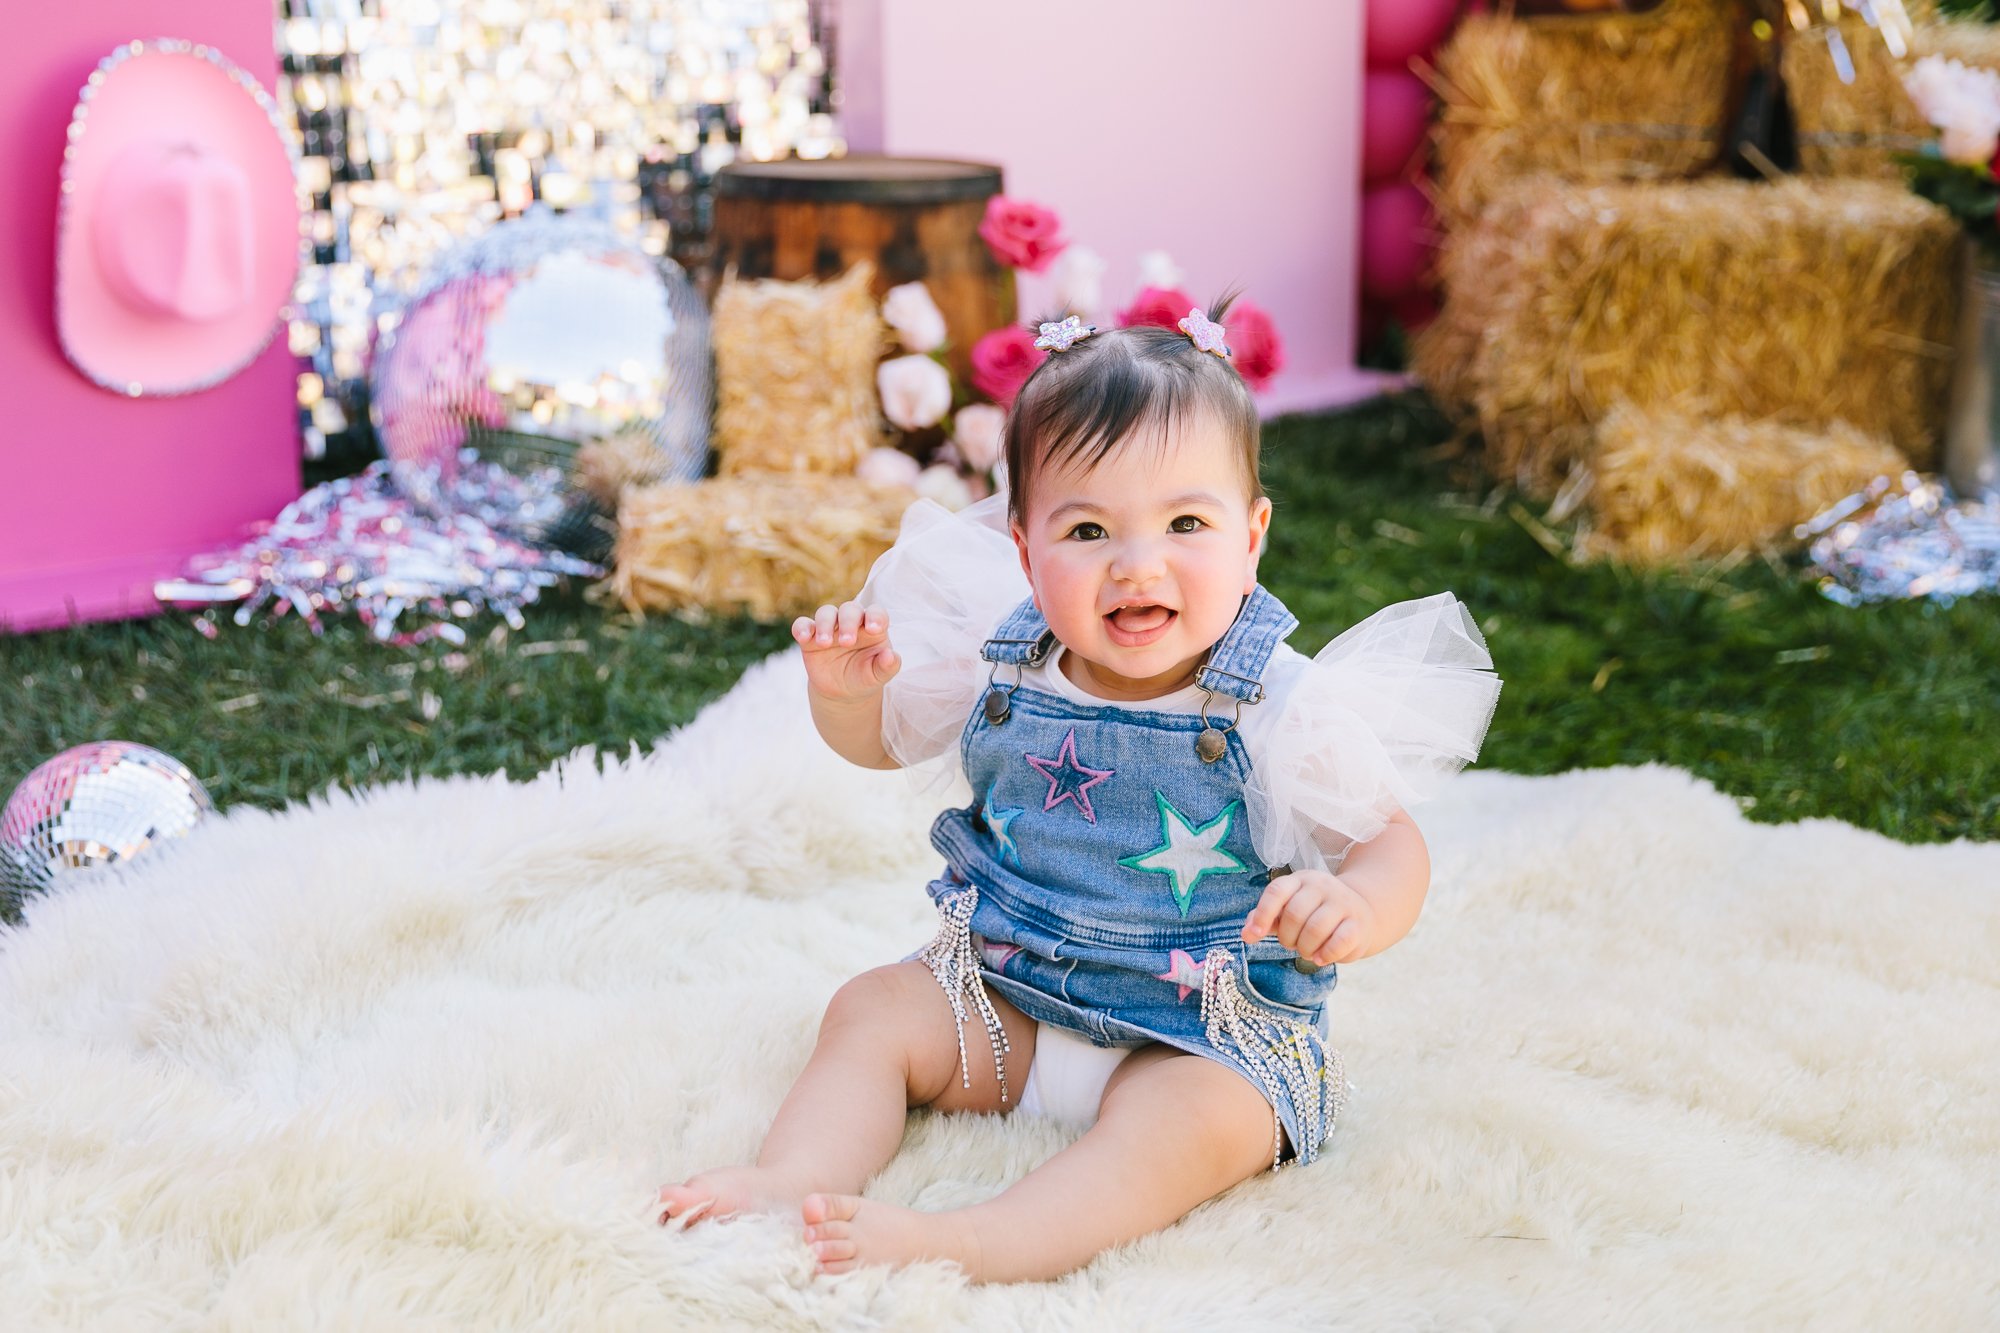 Los_Angeles_Party_Photographer_Luxury_Event_First_Birthday_Baby_Sherwood_Beverly_Hills_Cowboy_Disco_Theme_Girl_Child_Family_Photography-0302.jpg